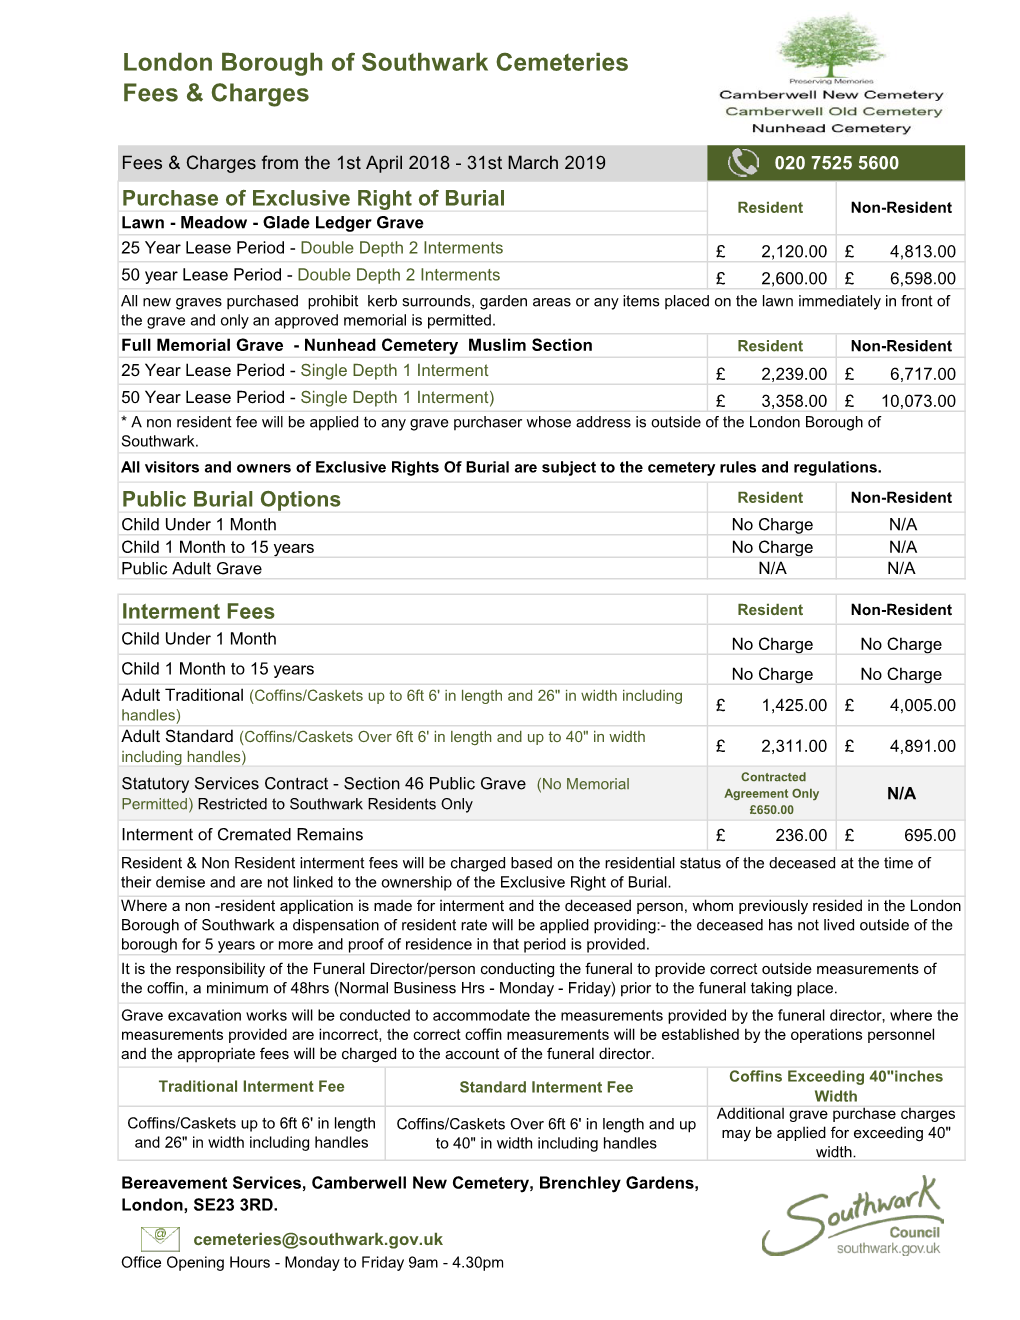 London Borough of Southwark Cemeteries Fees & Charges